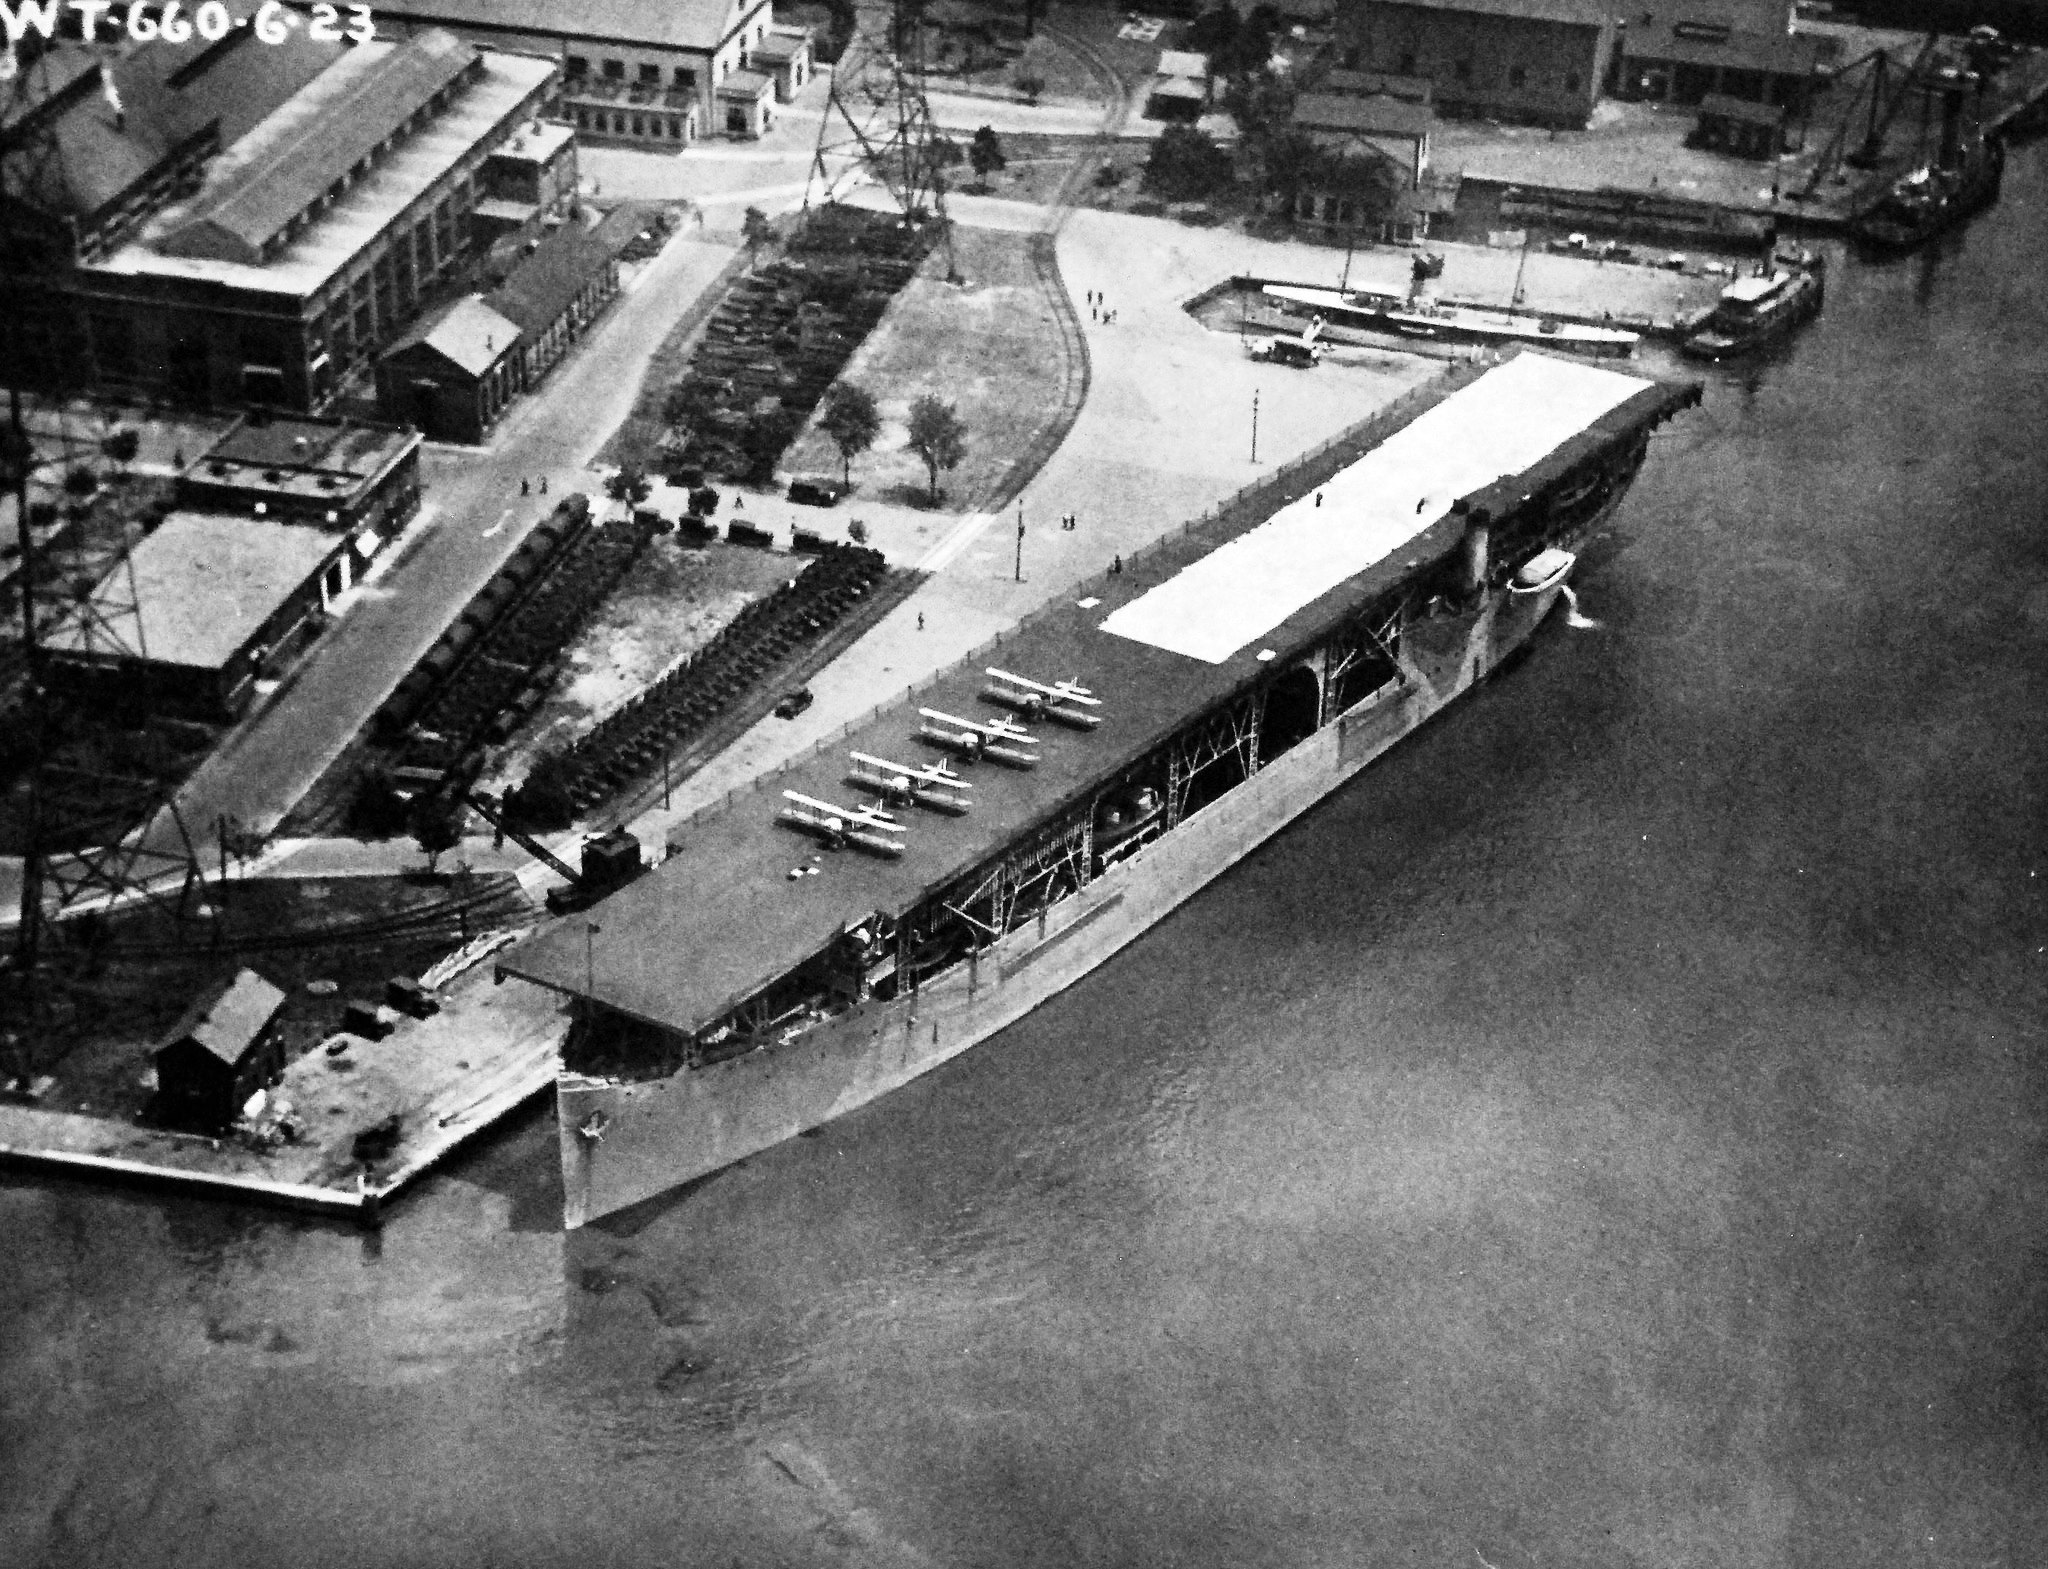 Aircraft carrier USS Langley (Langley-class) alongside the Washington Navy Yard, Washington, DC, United States, 3 Jul 1923. The white building at the photo’s top left is the present day National Museum of the Navy.